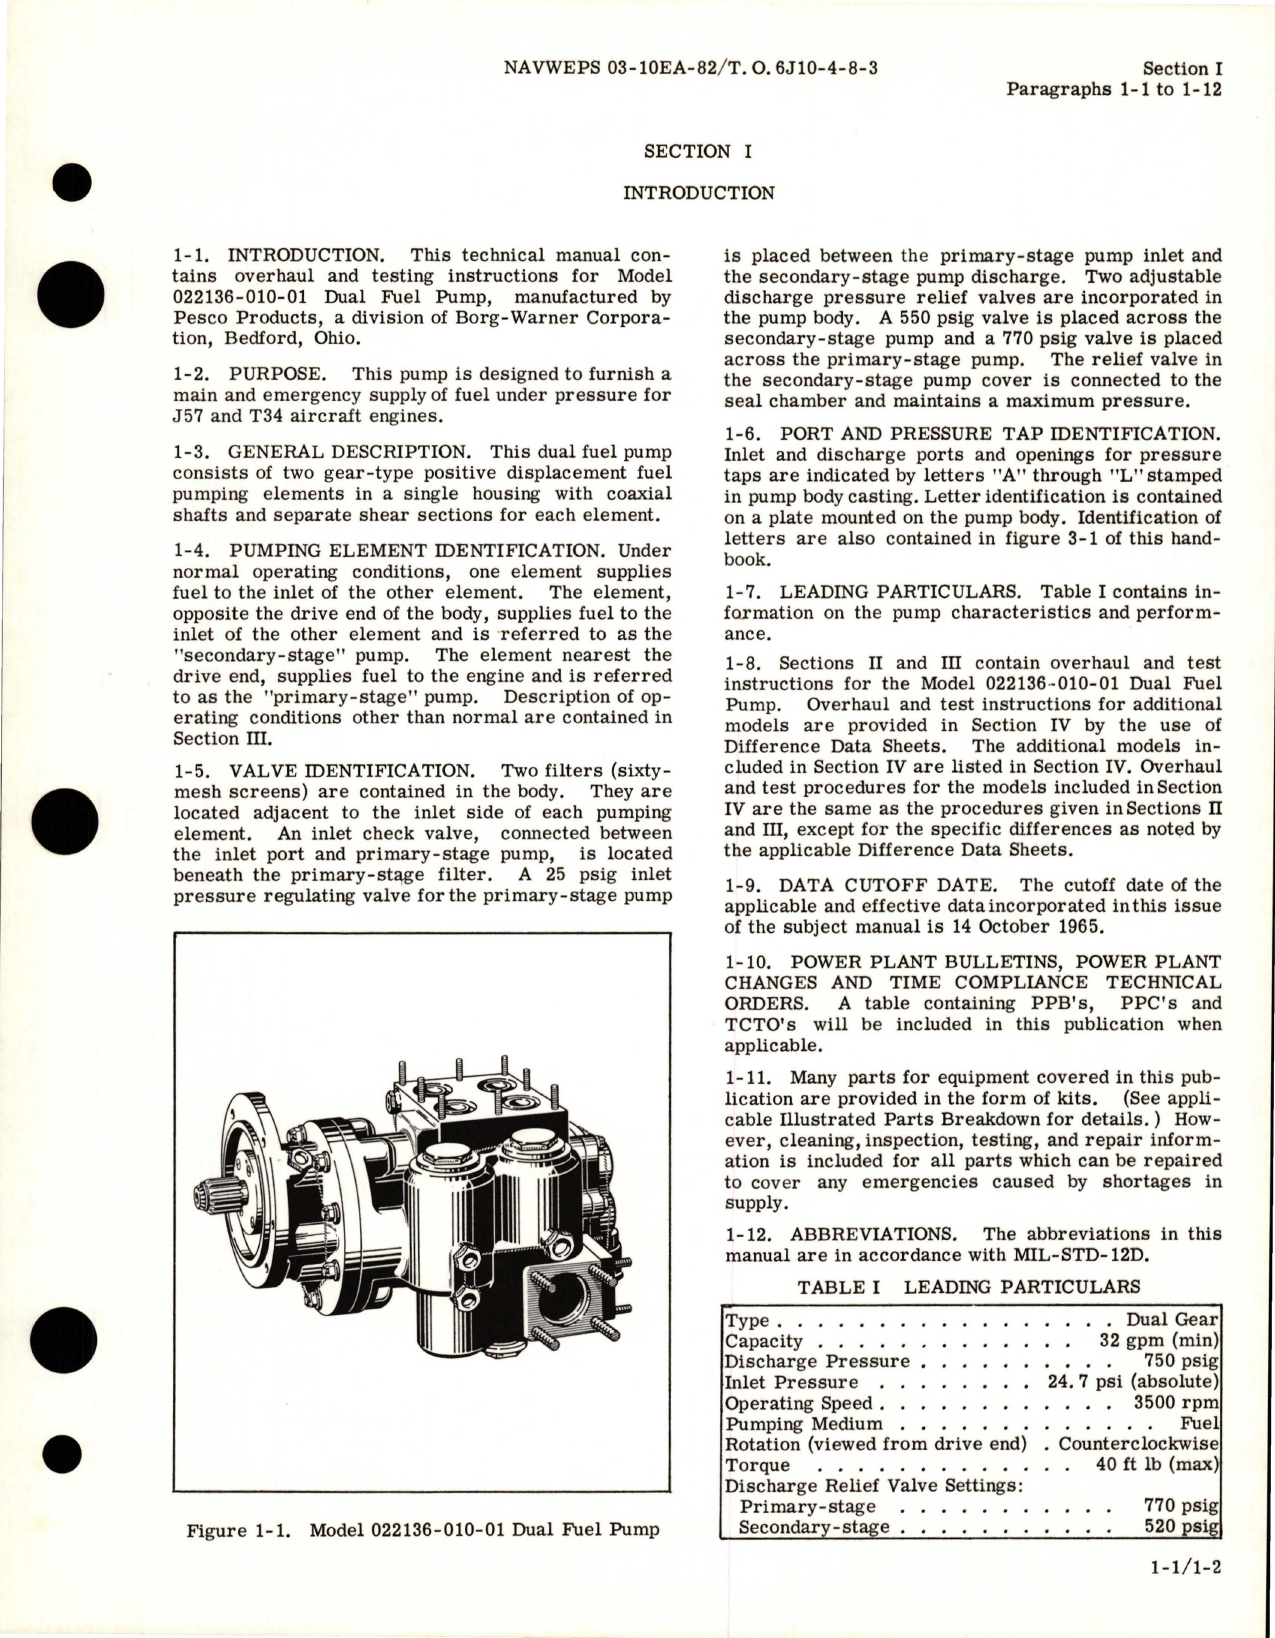 Sample page 7 from AirCorps Library document: Overhaul Instructions for Dual Fuel Pump Assembly - 022136-010, 022136-014, and 022136-021 Series